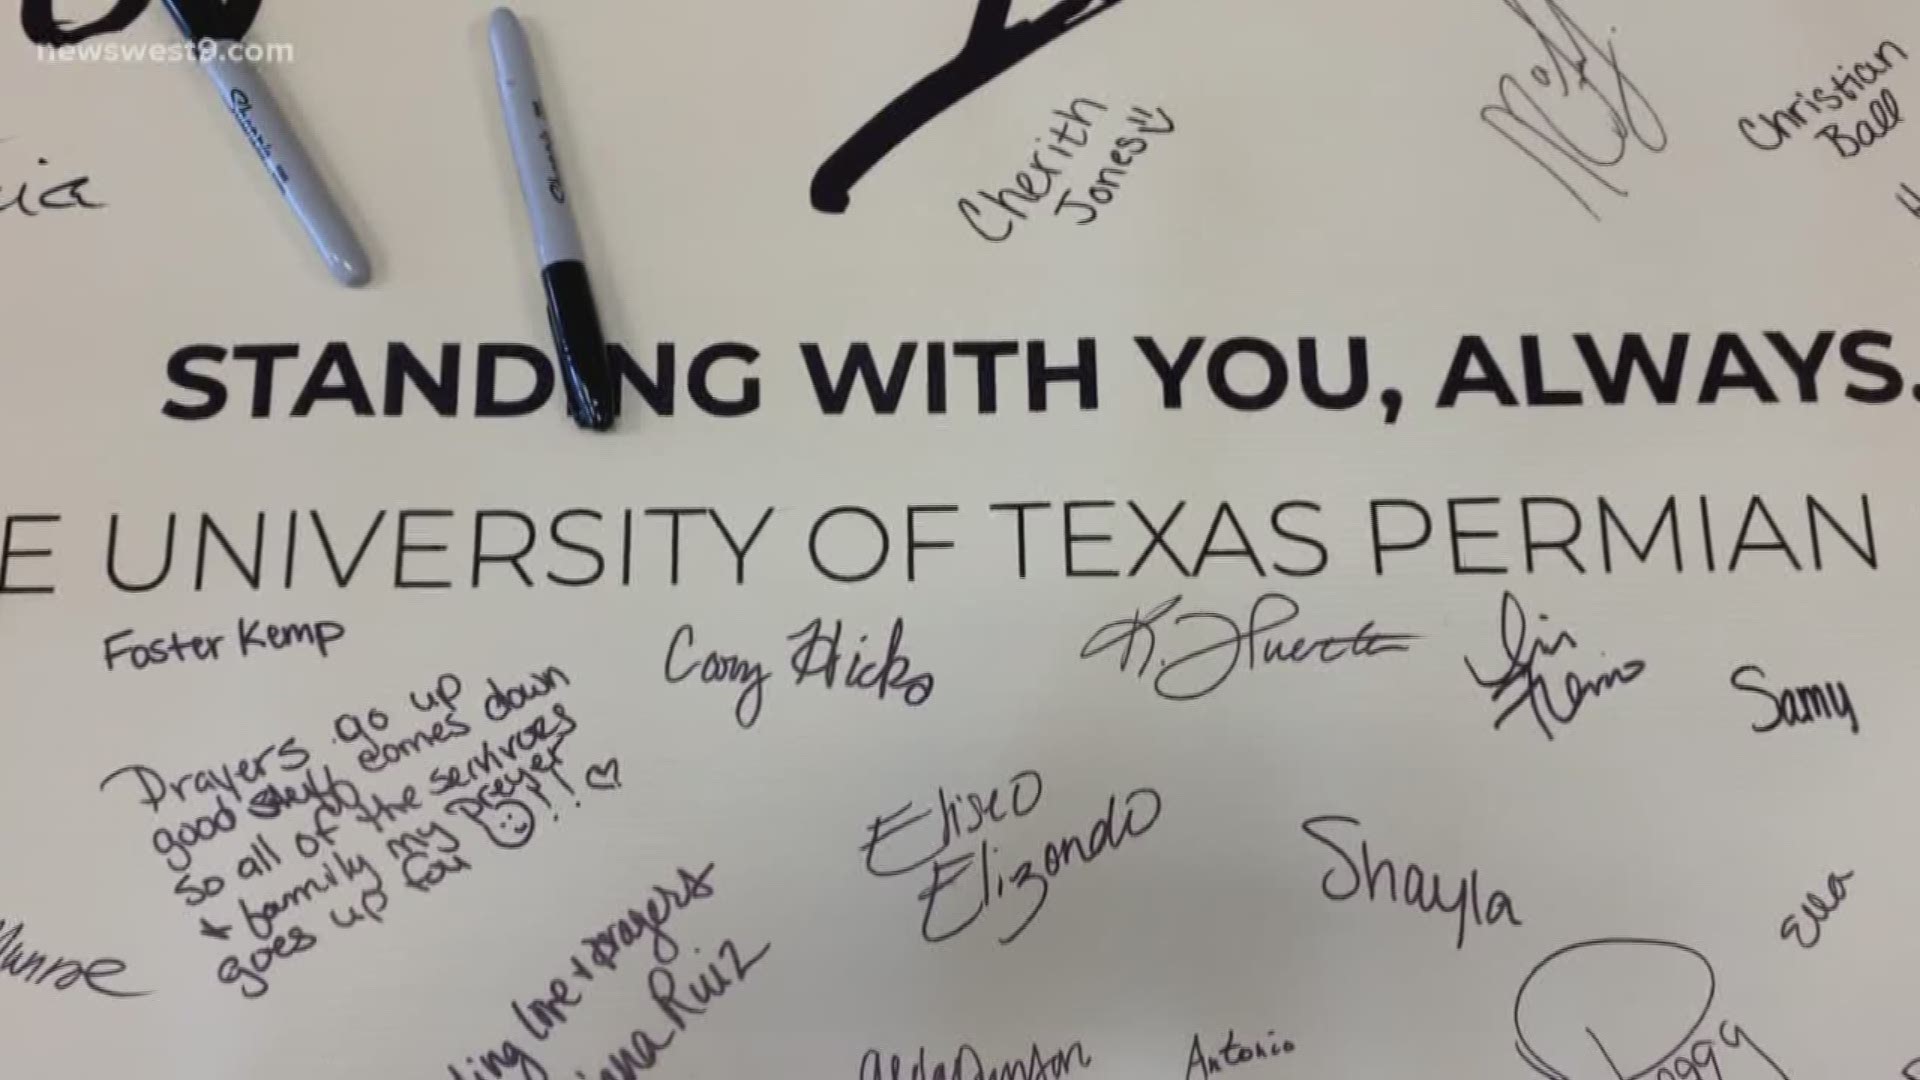 Students at UT Permian Basin gathered to send kind words to those affected by the Texas A&M Commerce shooting.